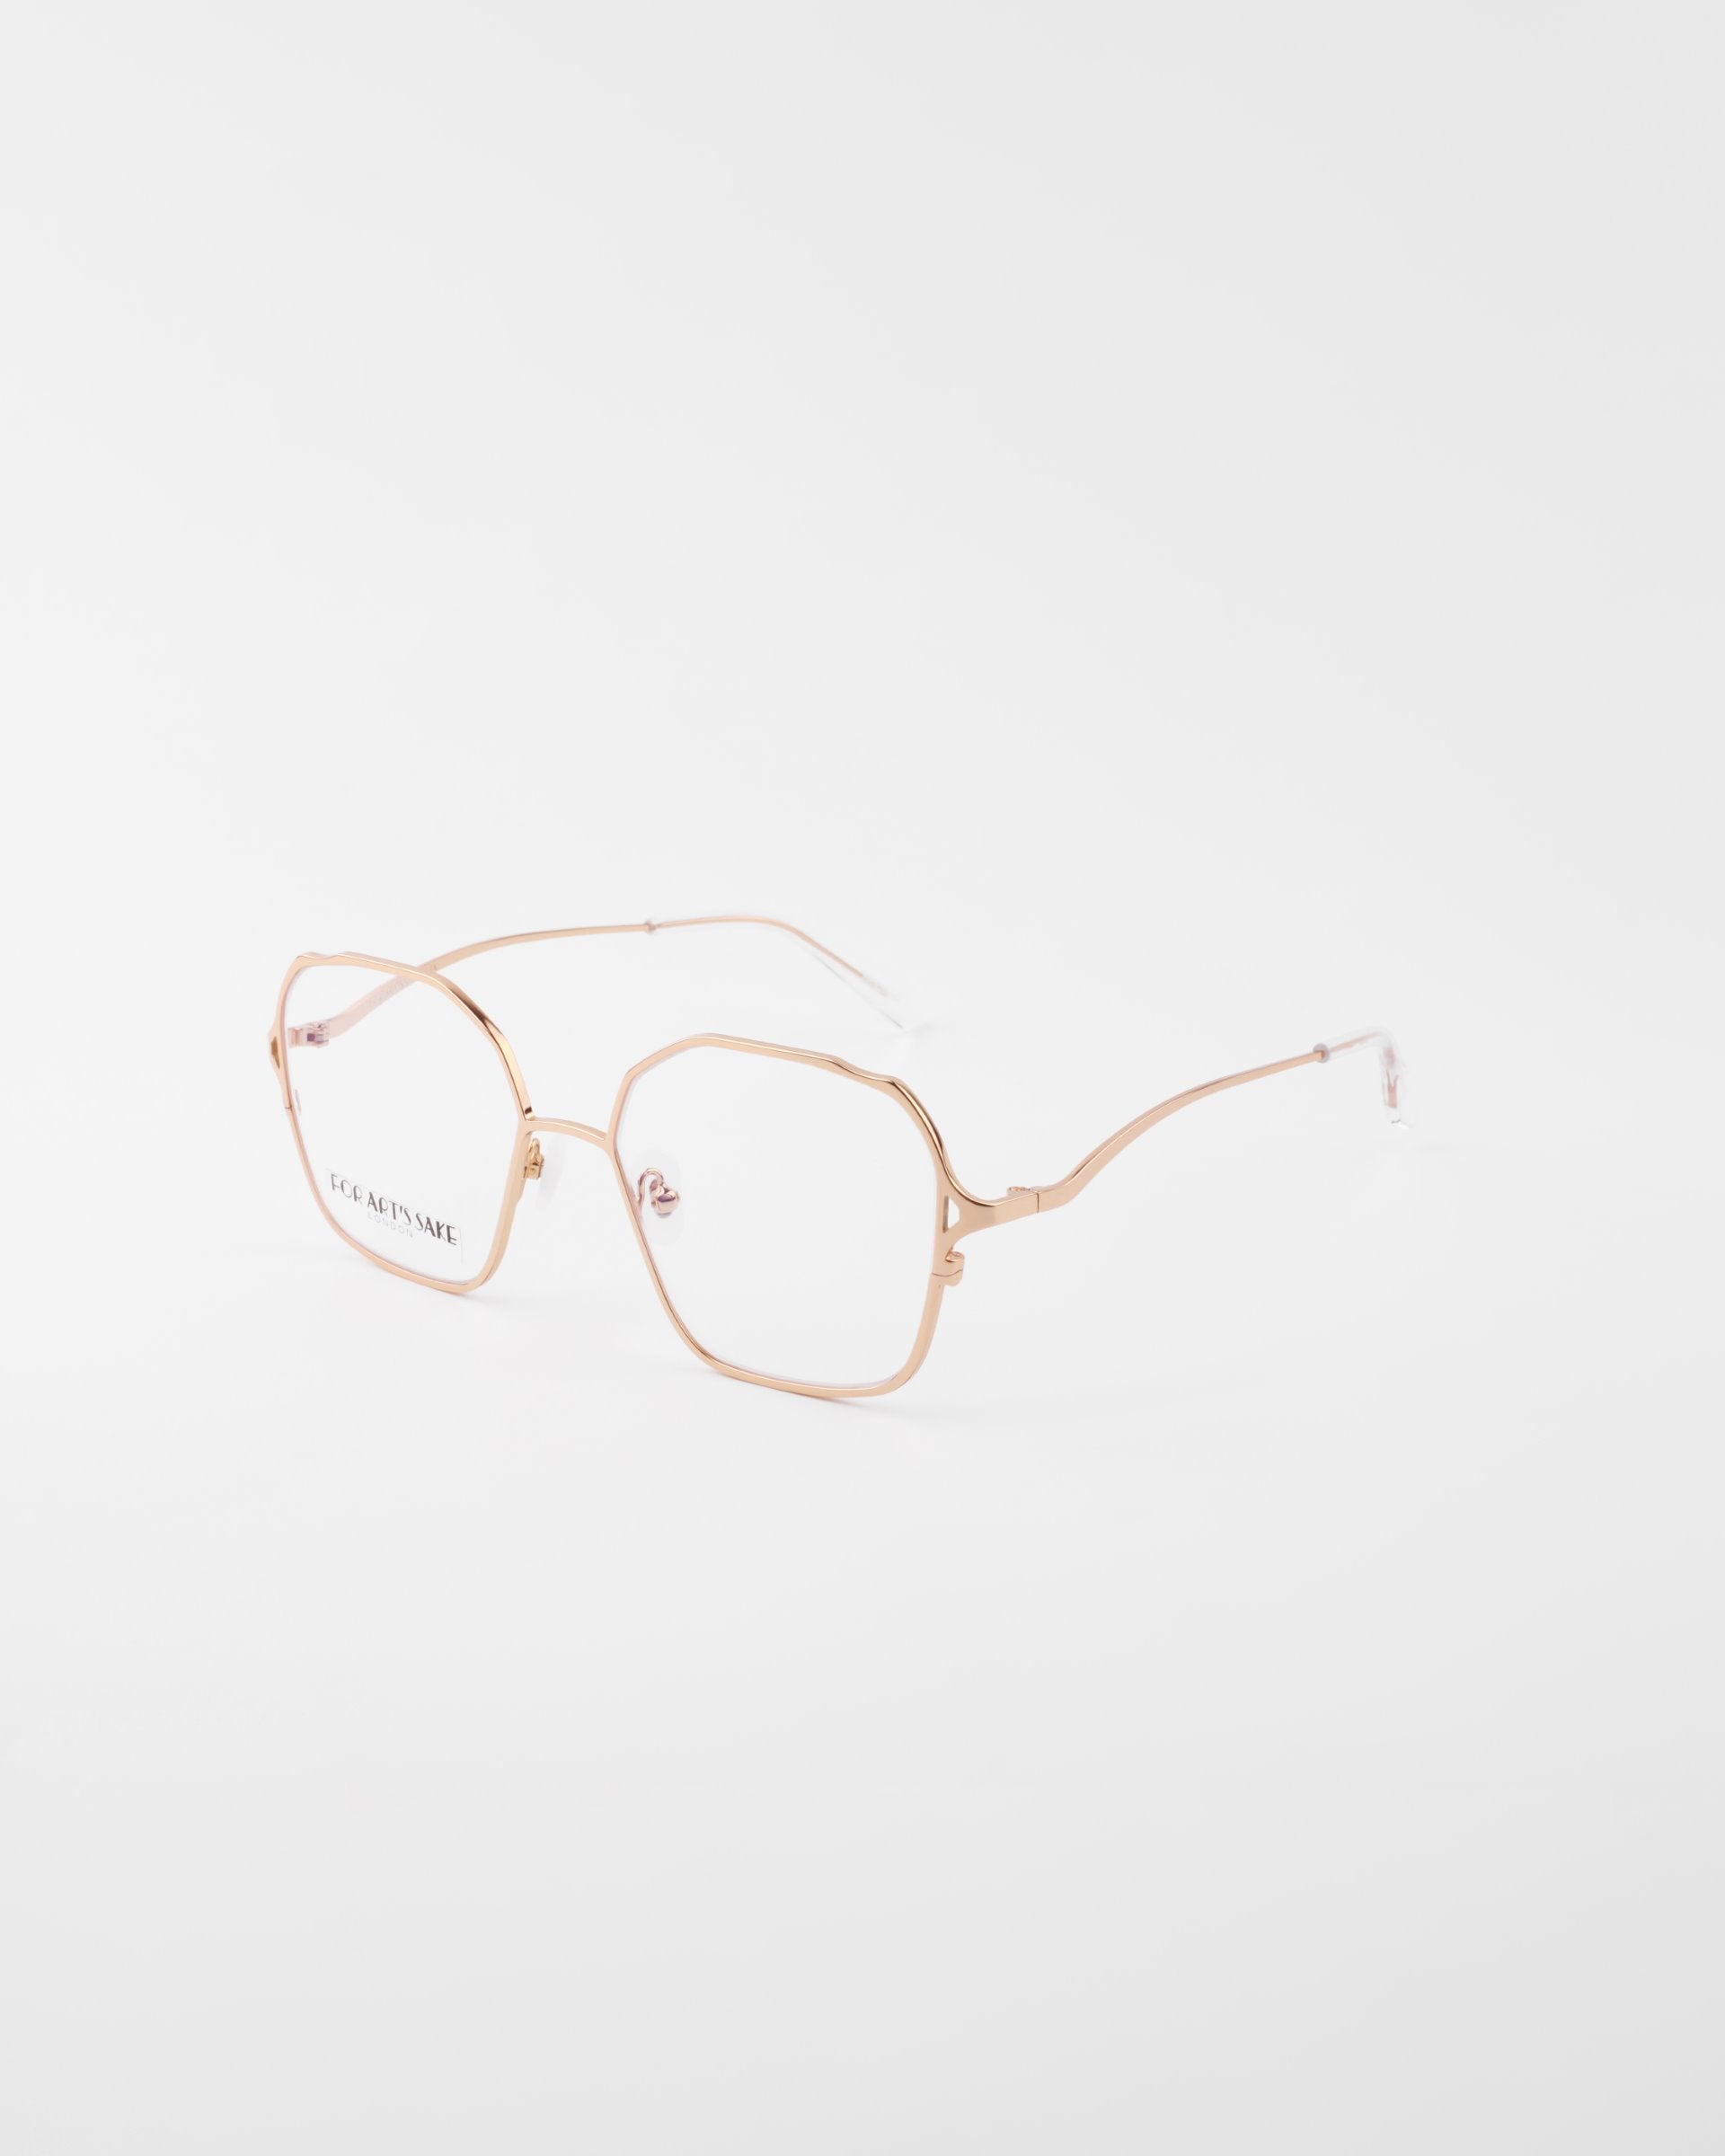 A pair of For Art's Sake® Mimi eyeglasses with thin, 18-karat gold-plated metal frames and slightly geometric lenses. The glasses are positioned at an angle on a white background, showcasing the streamlined arms and clear lenses.